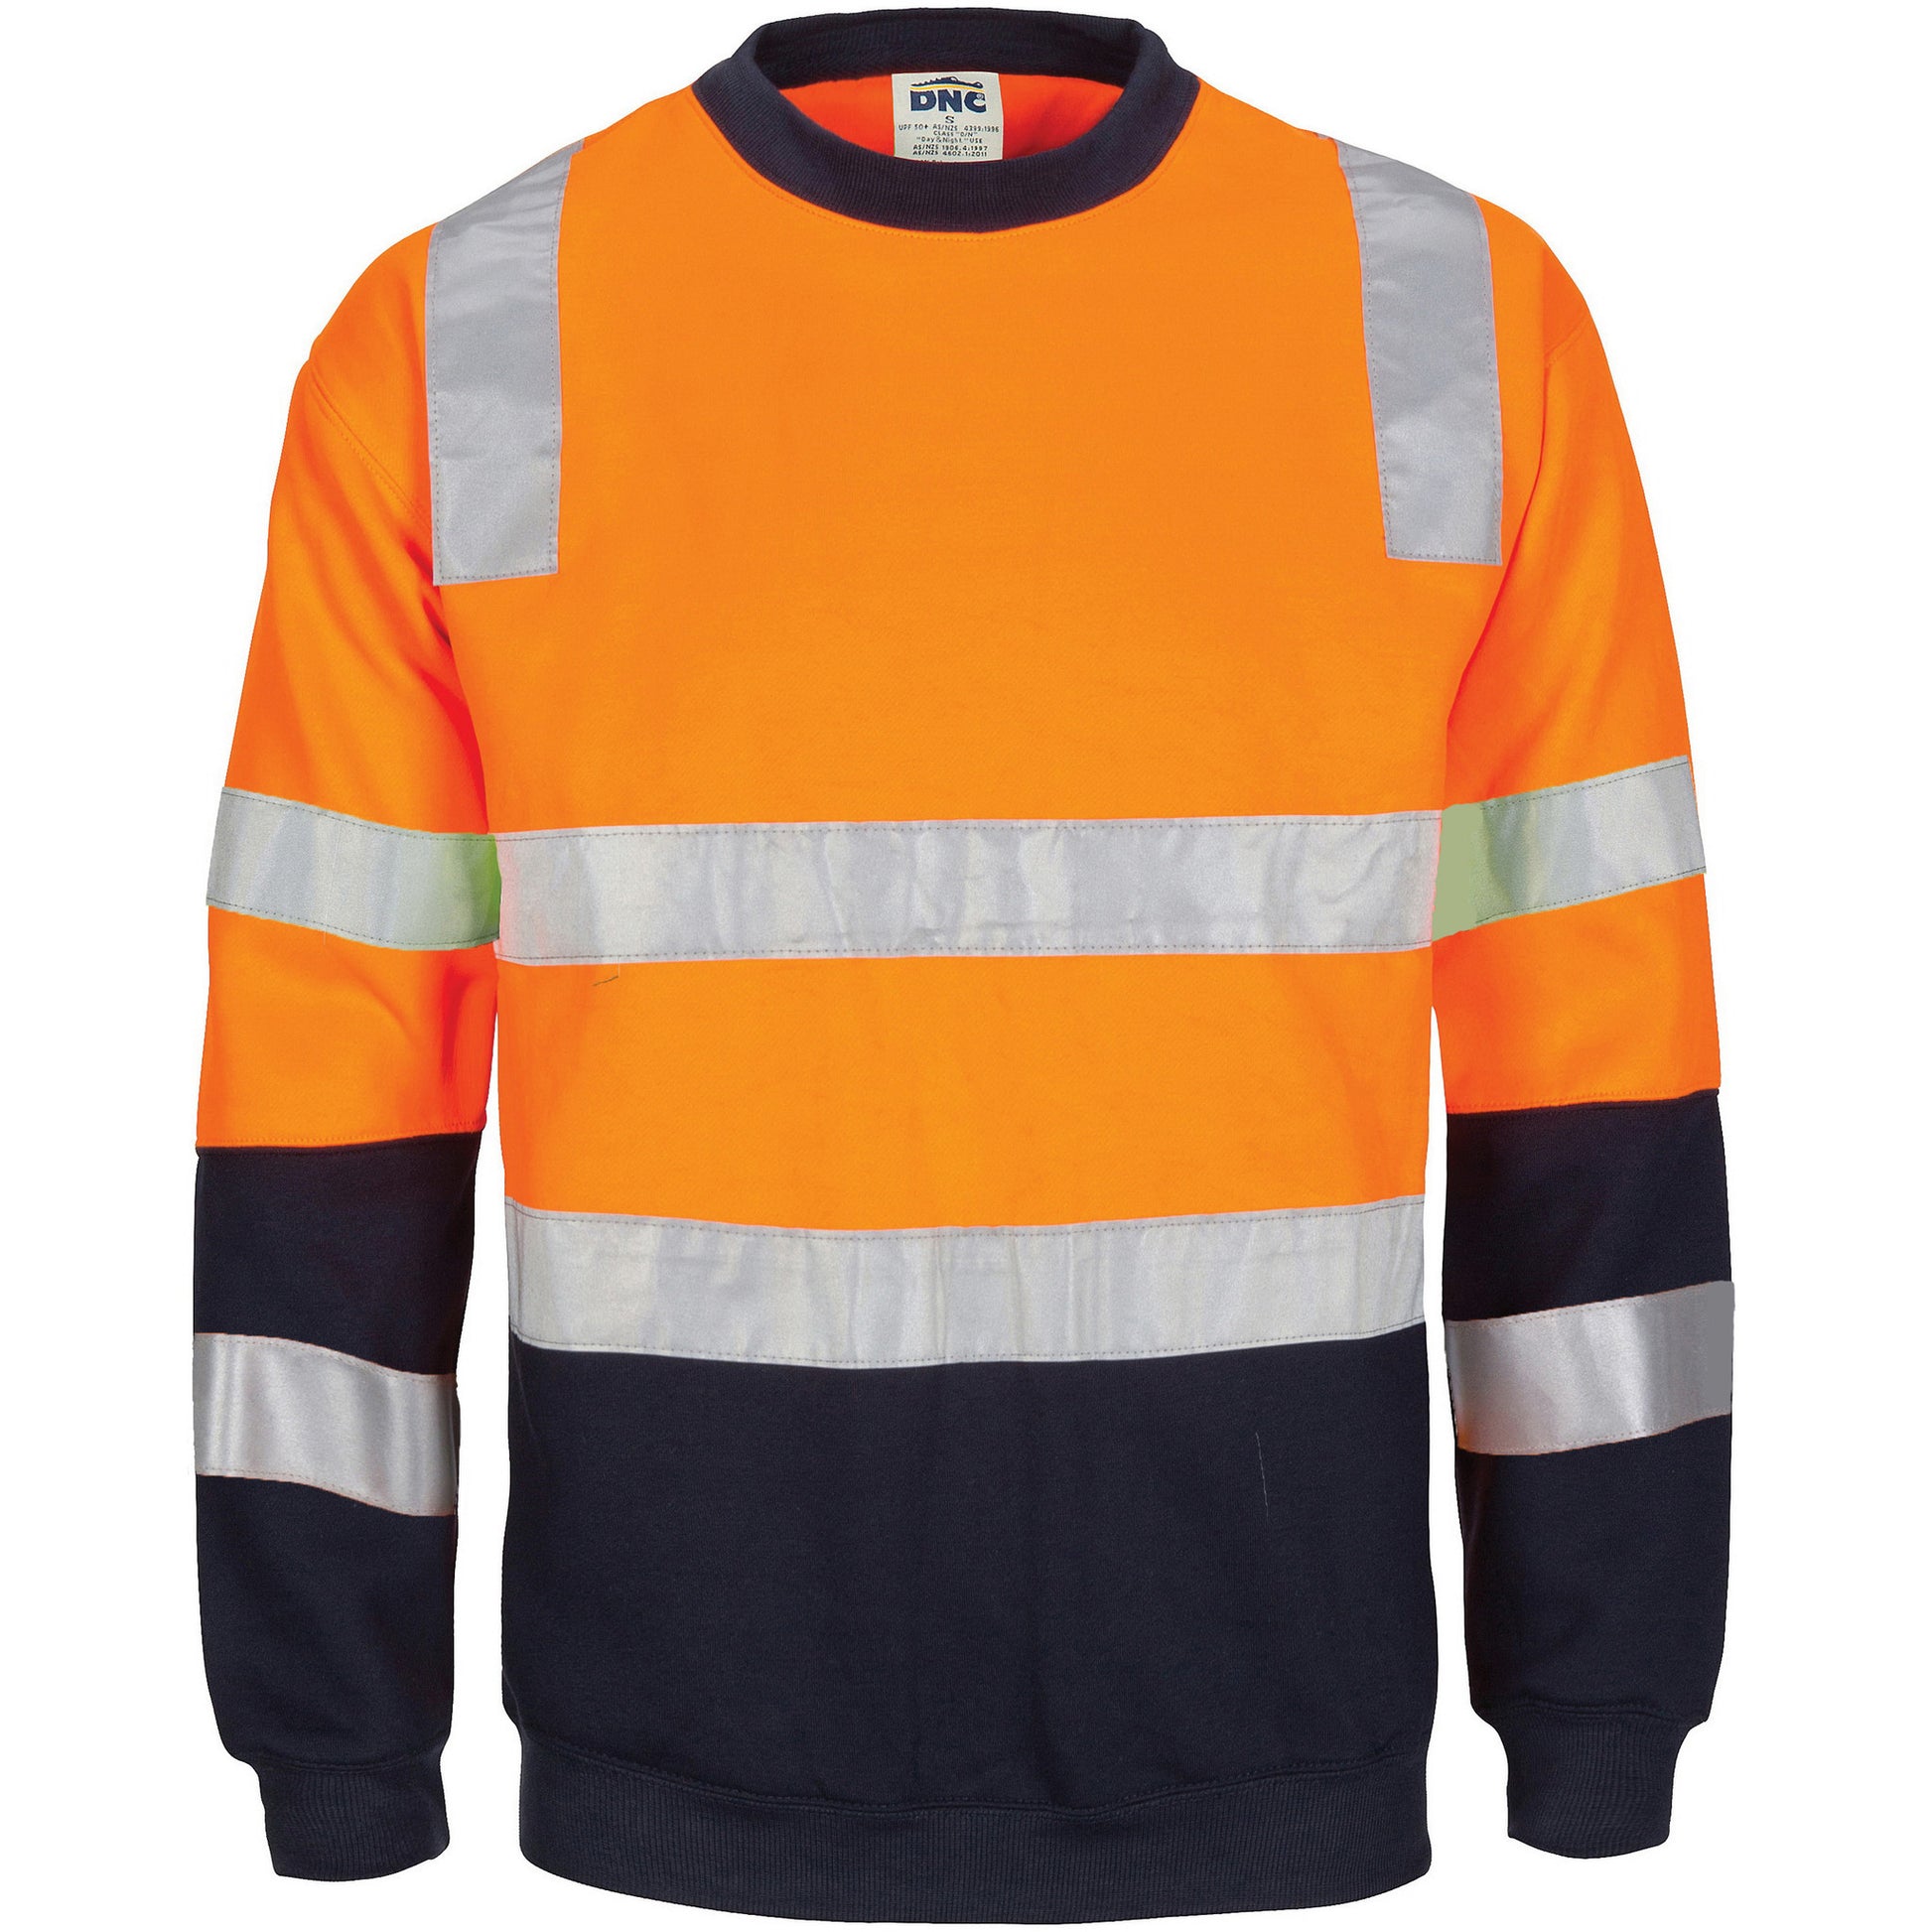 DNC Hivis 2 Tone, Crew-neck Fleecy Sweat Shirt With Shoulders, Double Hoop Body And Arms Csr R/tape (3723)